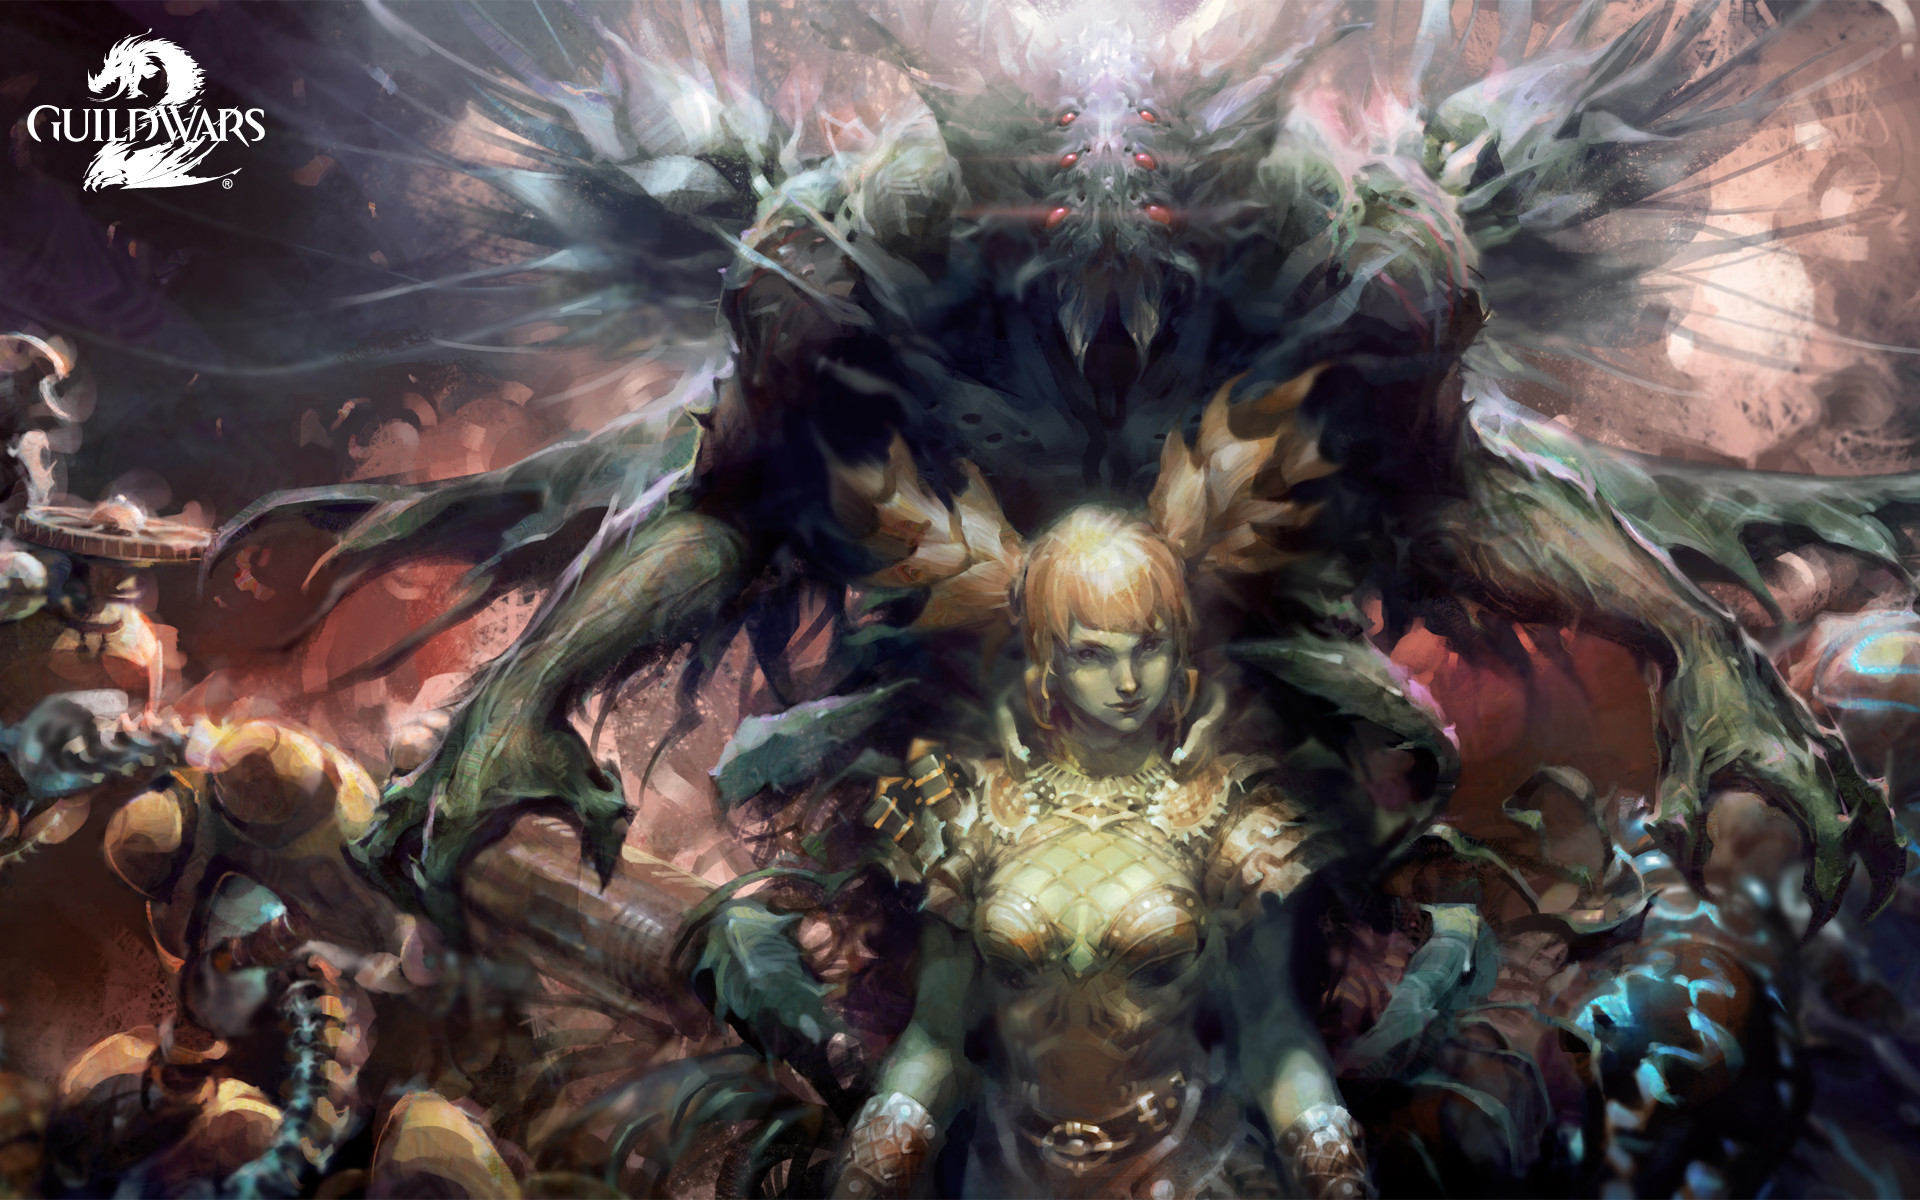 1920x1200 Guild Wars 2 images The Nightmares Within HD wallpaper and background photos